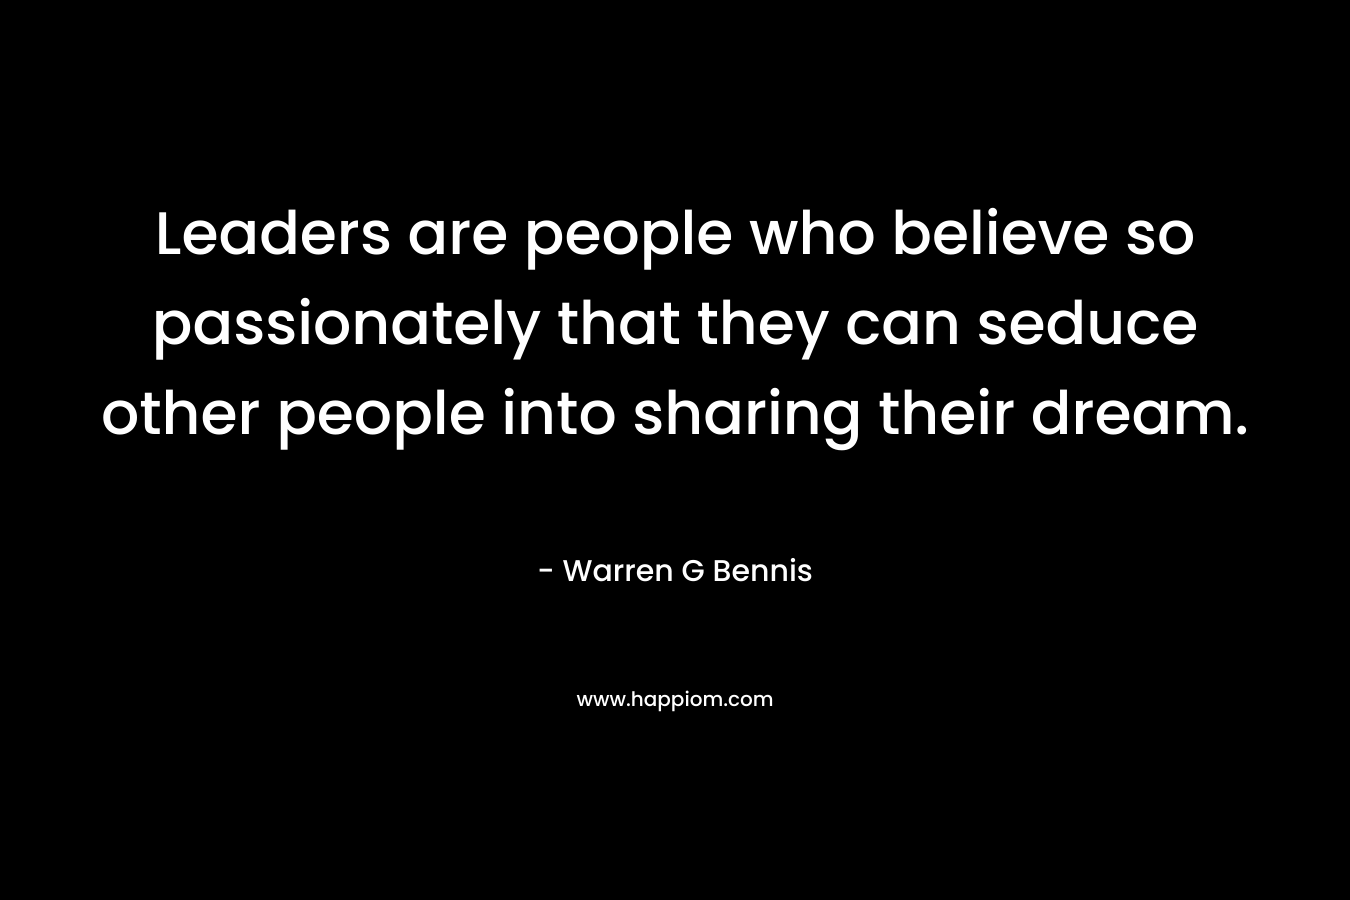 Leaders are people who believe so passionately that they can seduce other people into sharing their dream. – Warren G Bennis